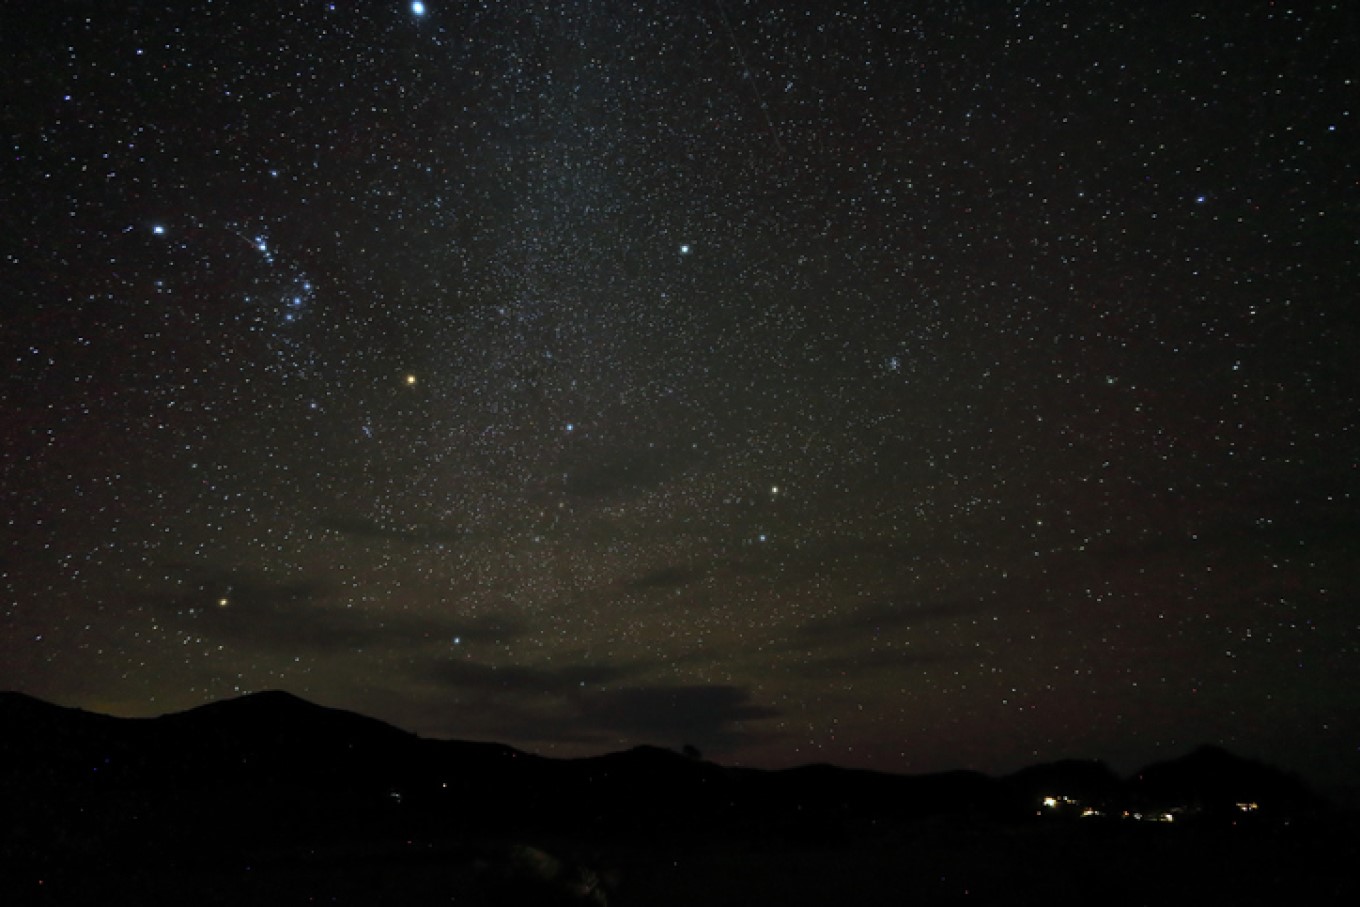 Aotea / Great Barrier Island has Dark Sky Sanctuary status, meaning it is one of the darkest places in the world.